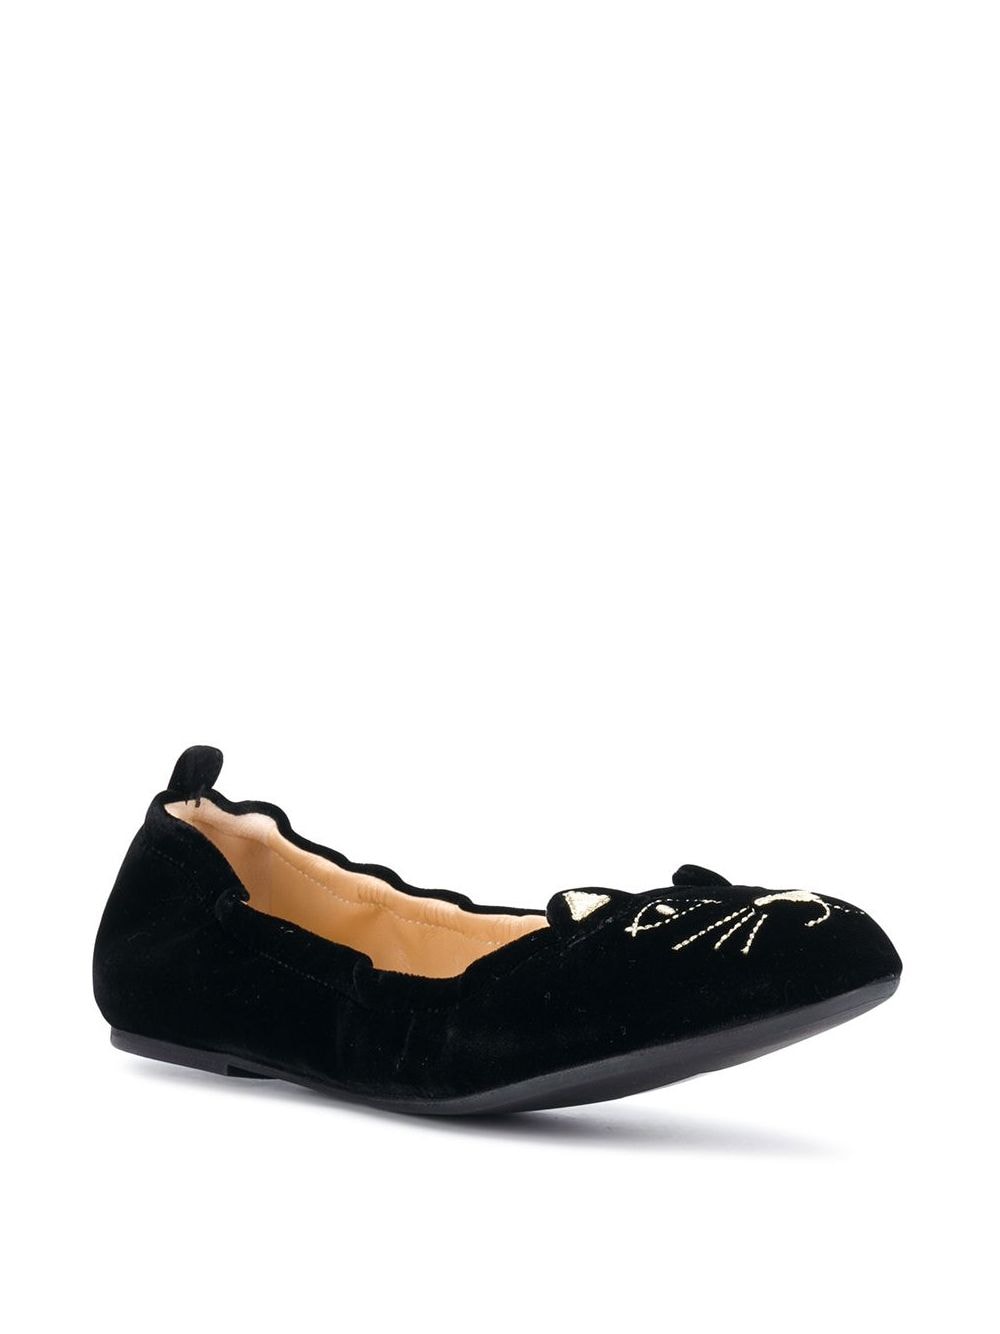 Image 2 of Charlotte Olympia kitten embroided ballerina shoes